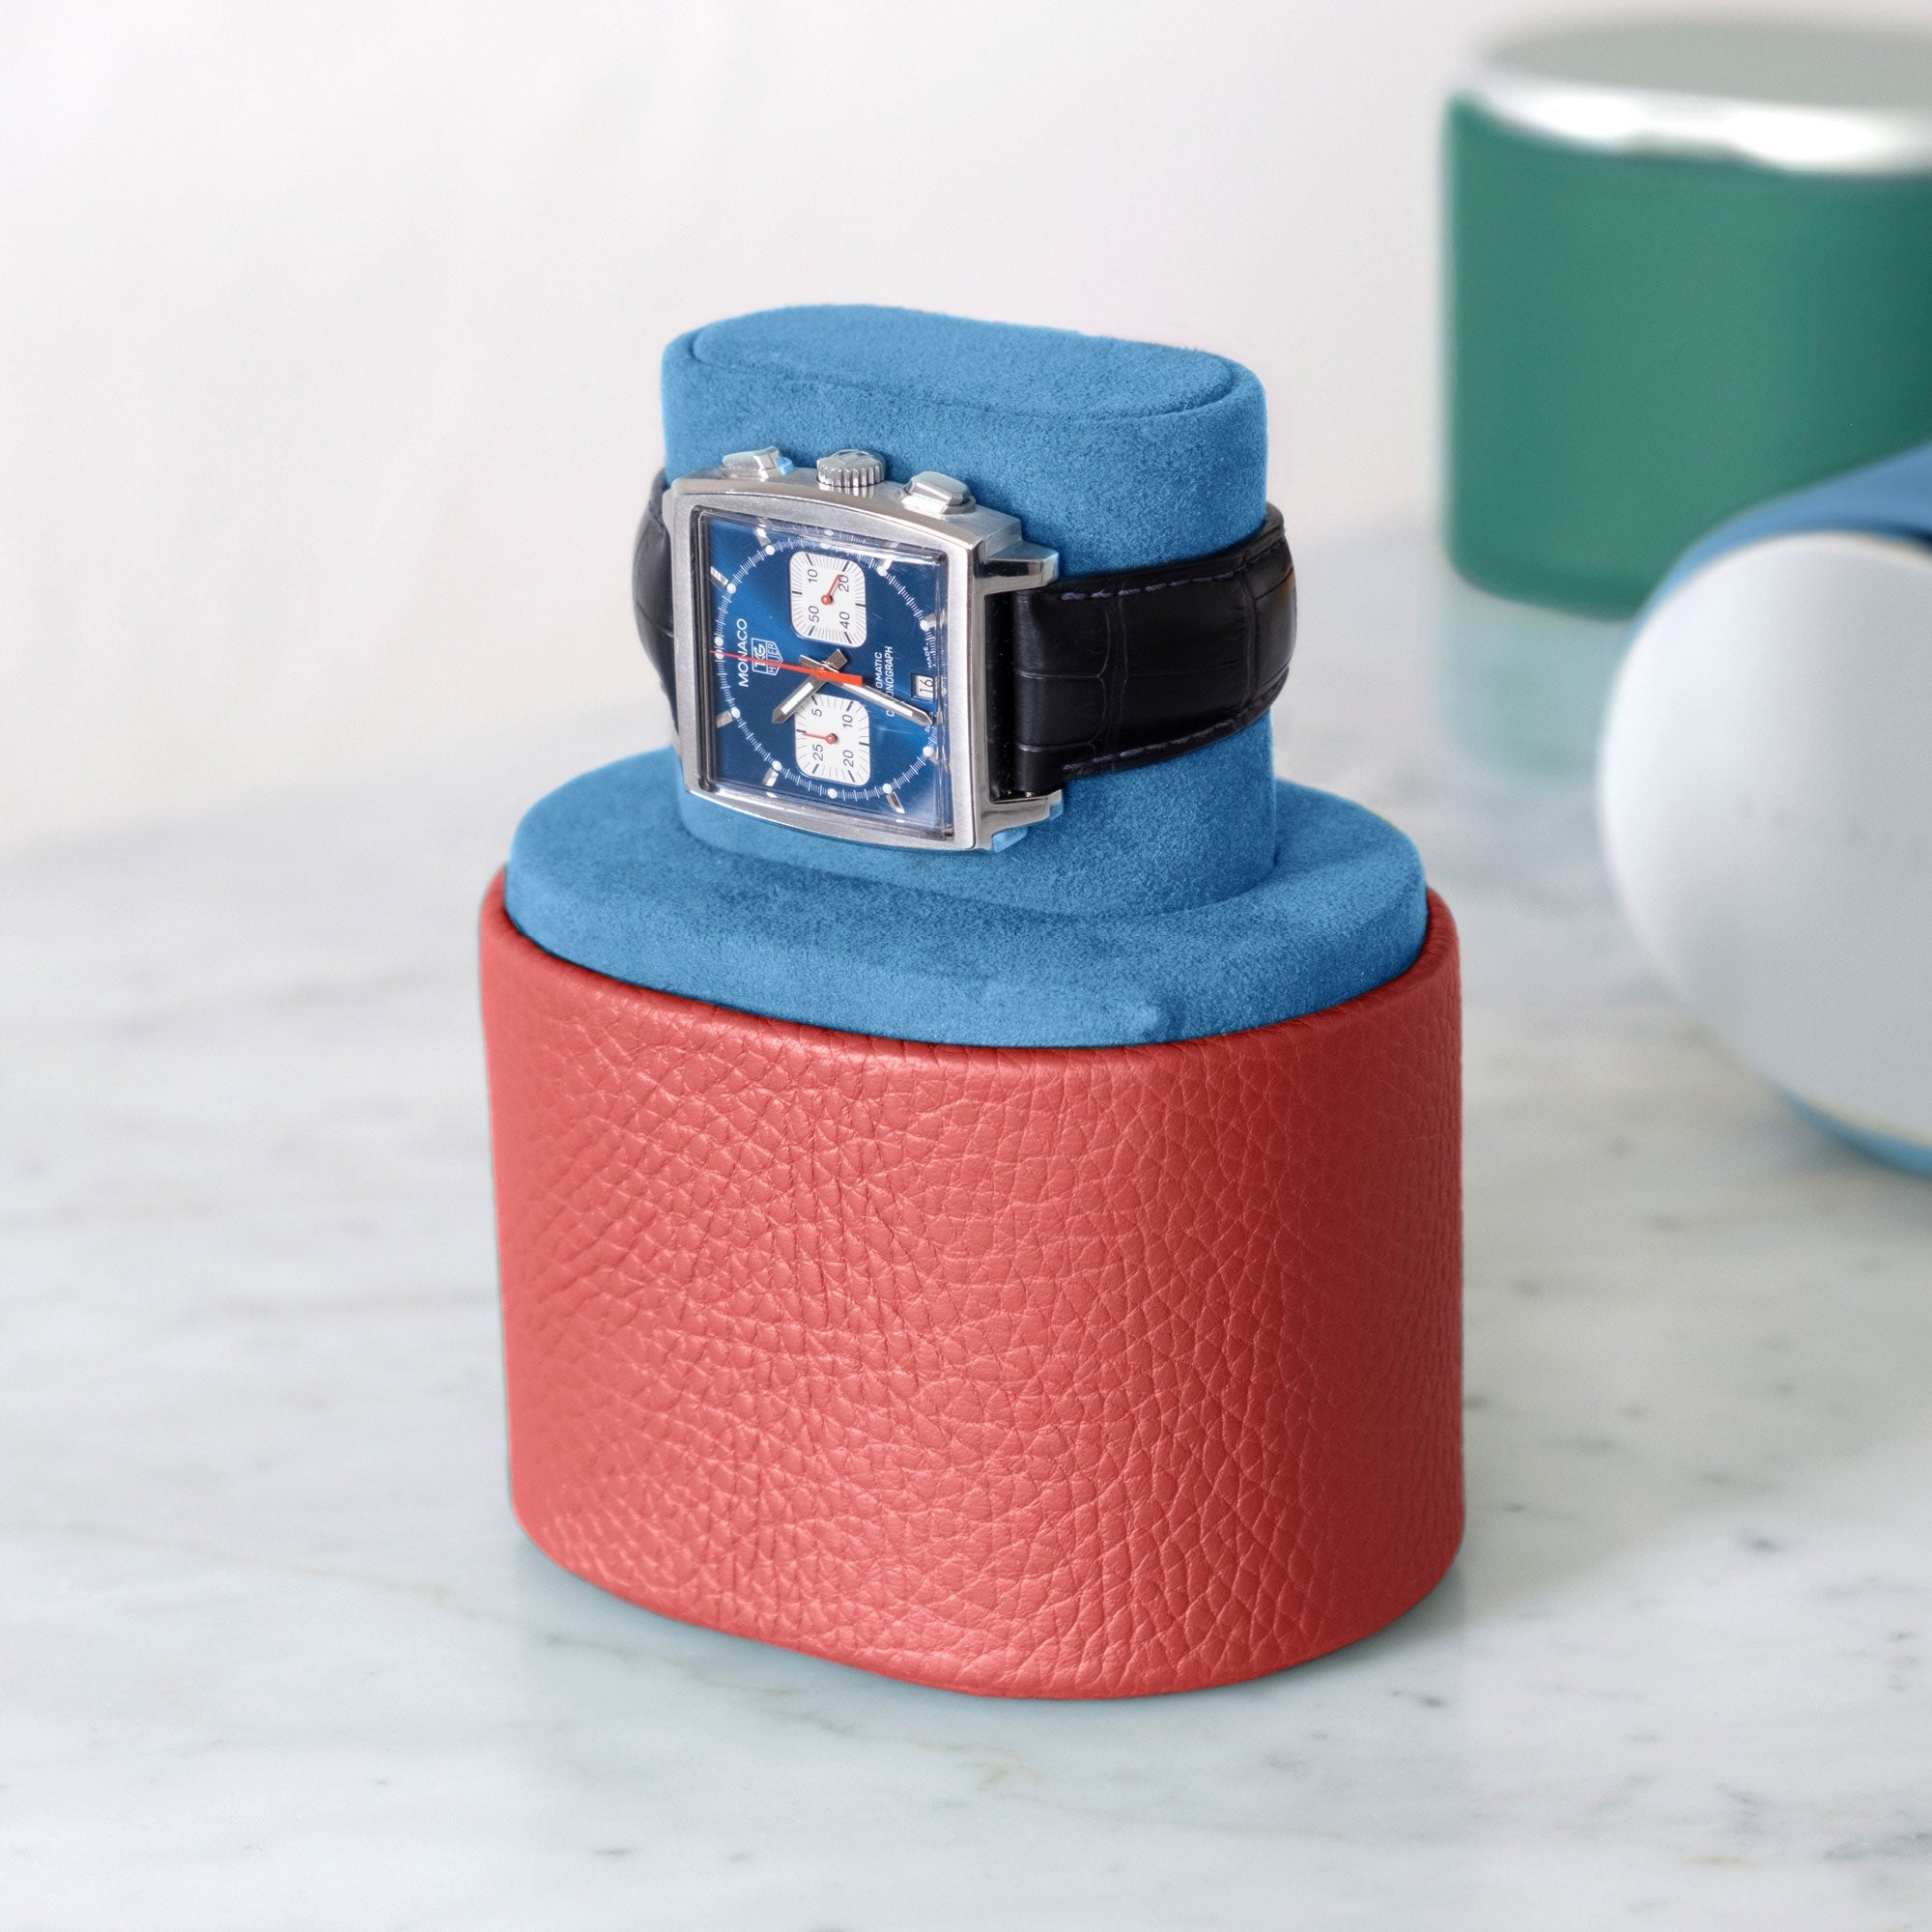 Lifestyle photo of Tagheuer Monaco luxury watch placed on Theo watch roll in hibiscus leather and Cyan blue Alcantara in watch stand position